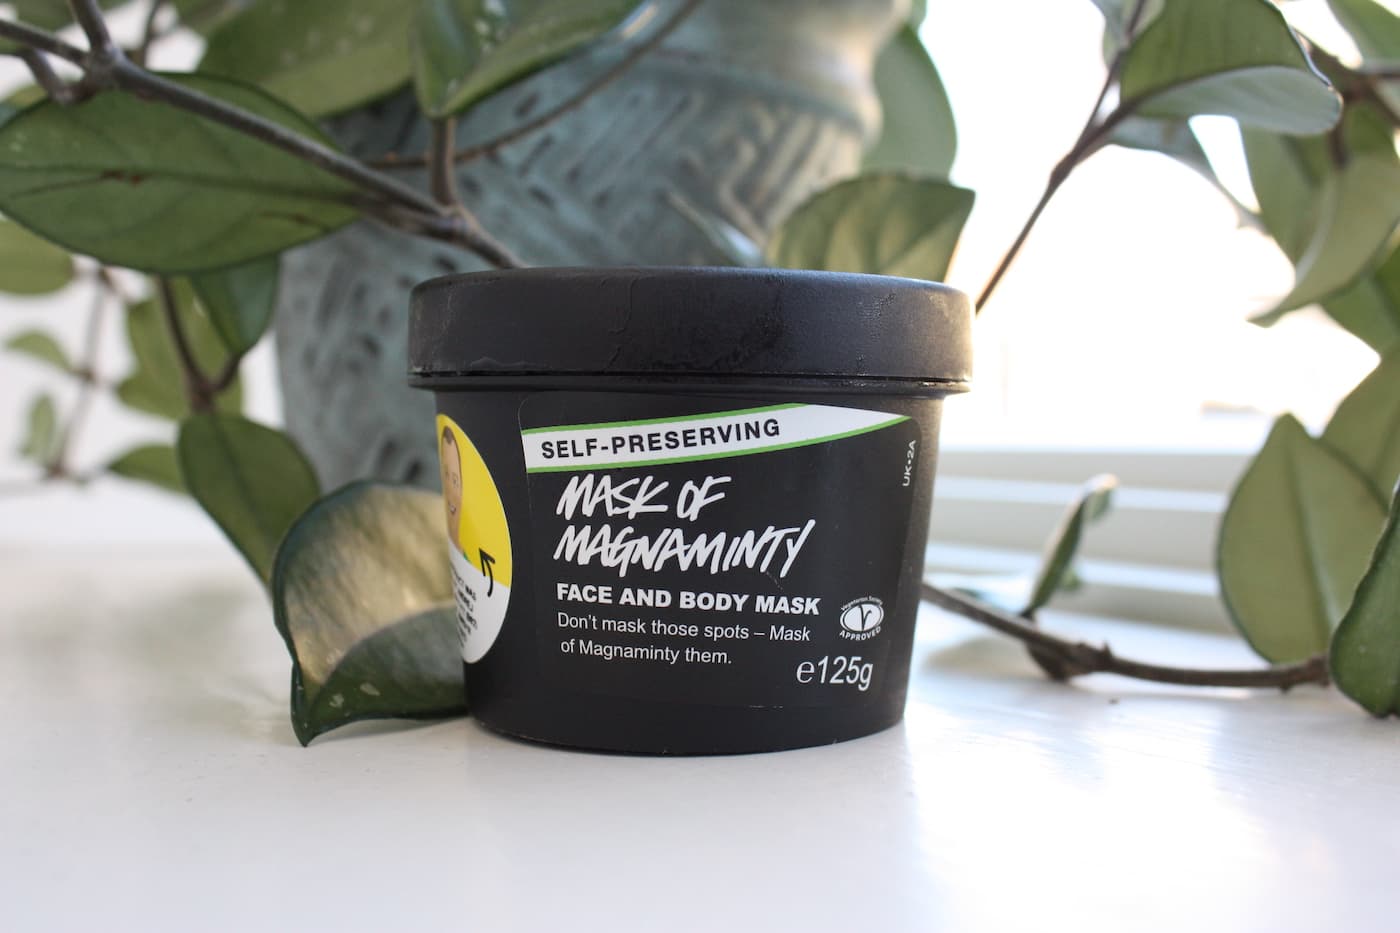 face and body mask of magnaminty lush 2018